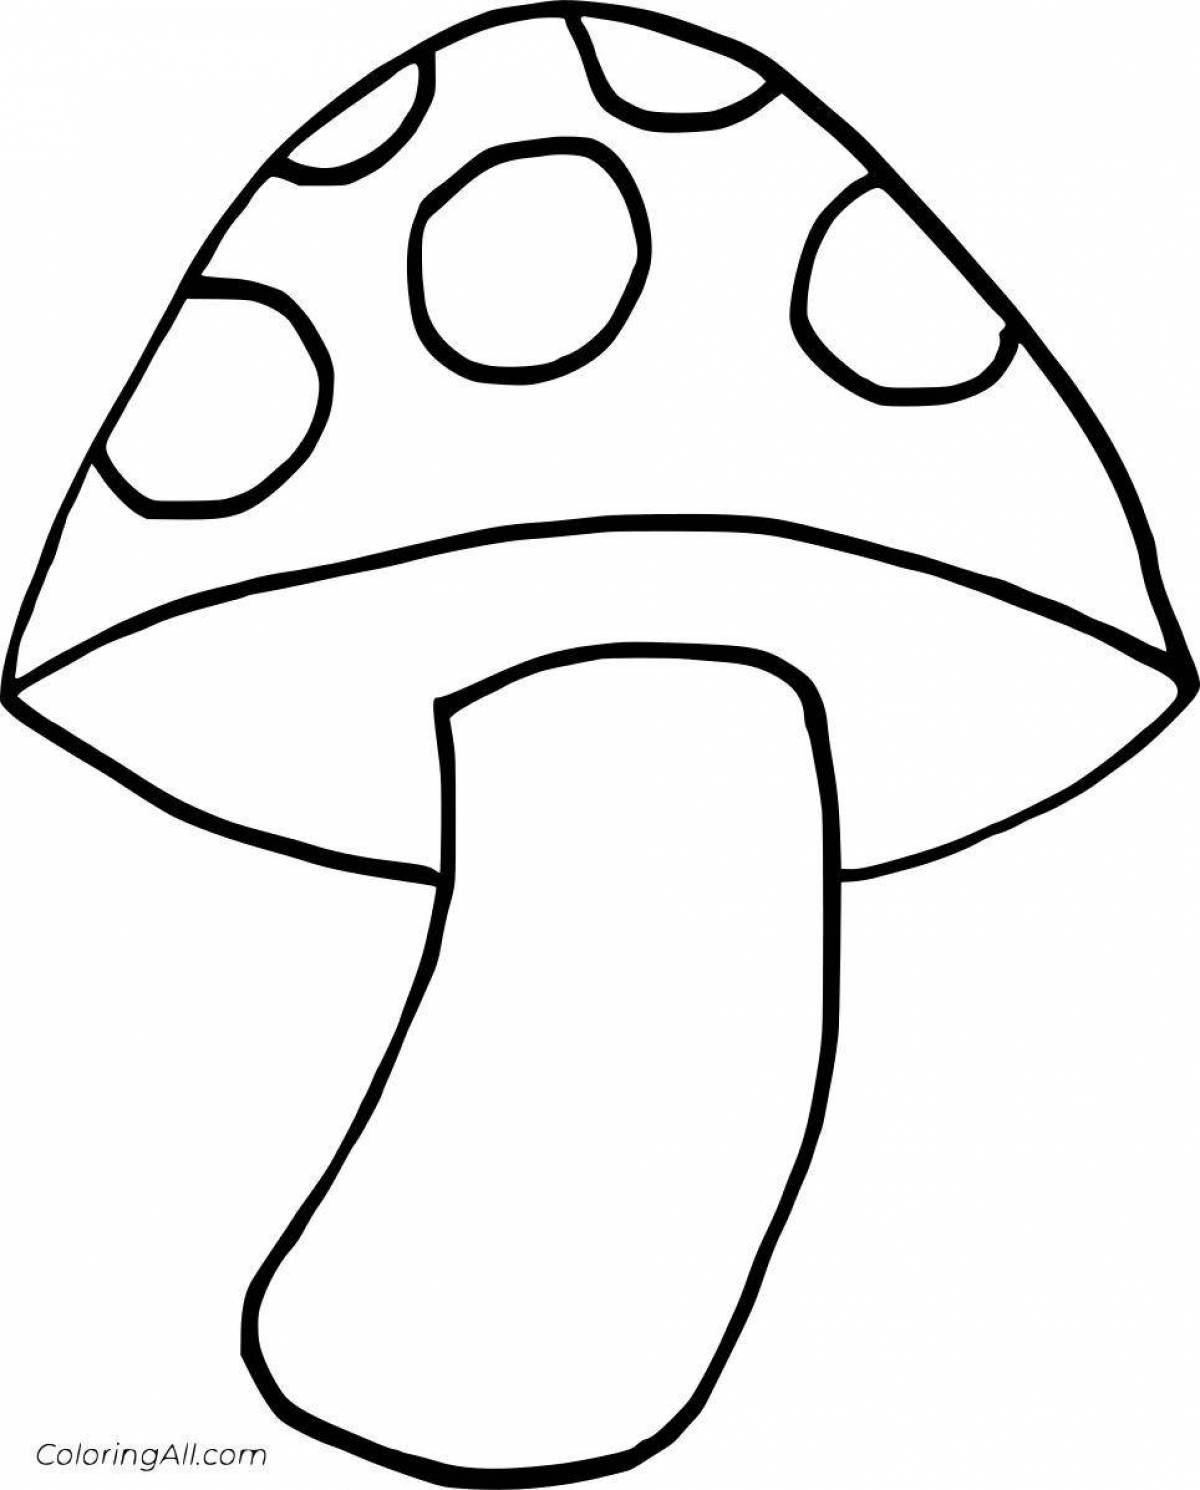 Magic coloring fly agaric for kids